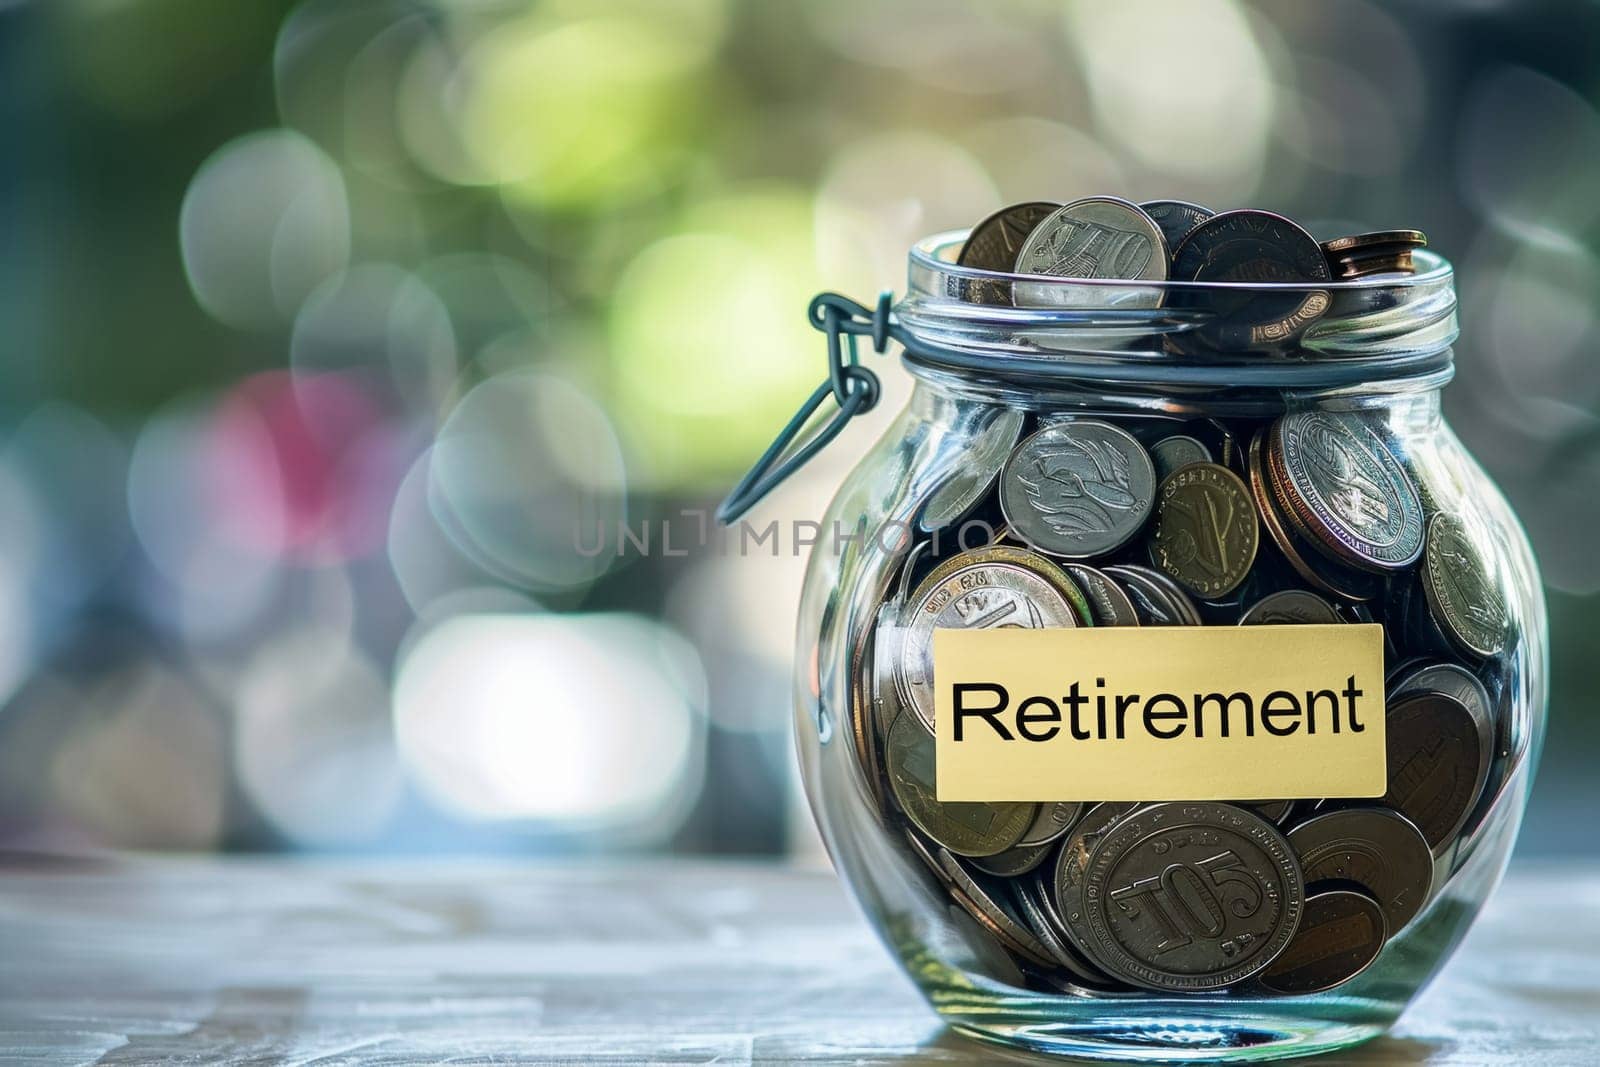 A clear jar labeled 'Retirement', filled with coins, against a blurred green background, representing financial planning